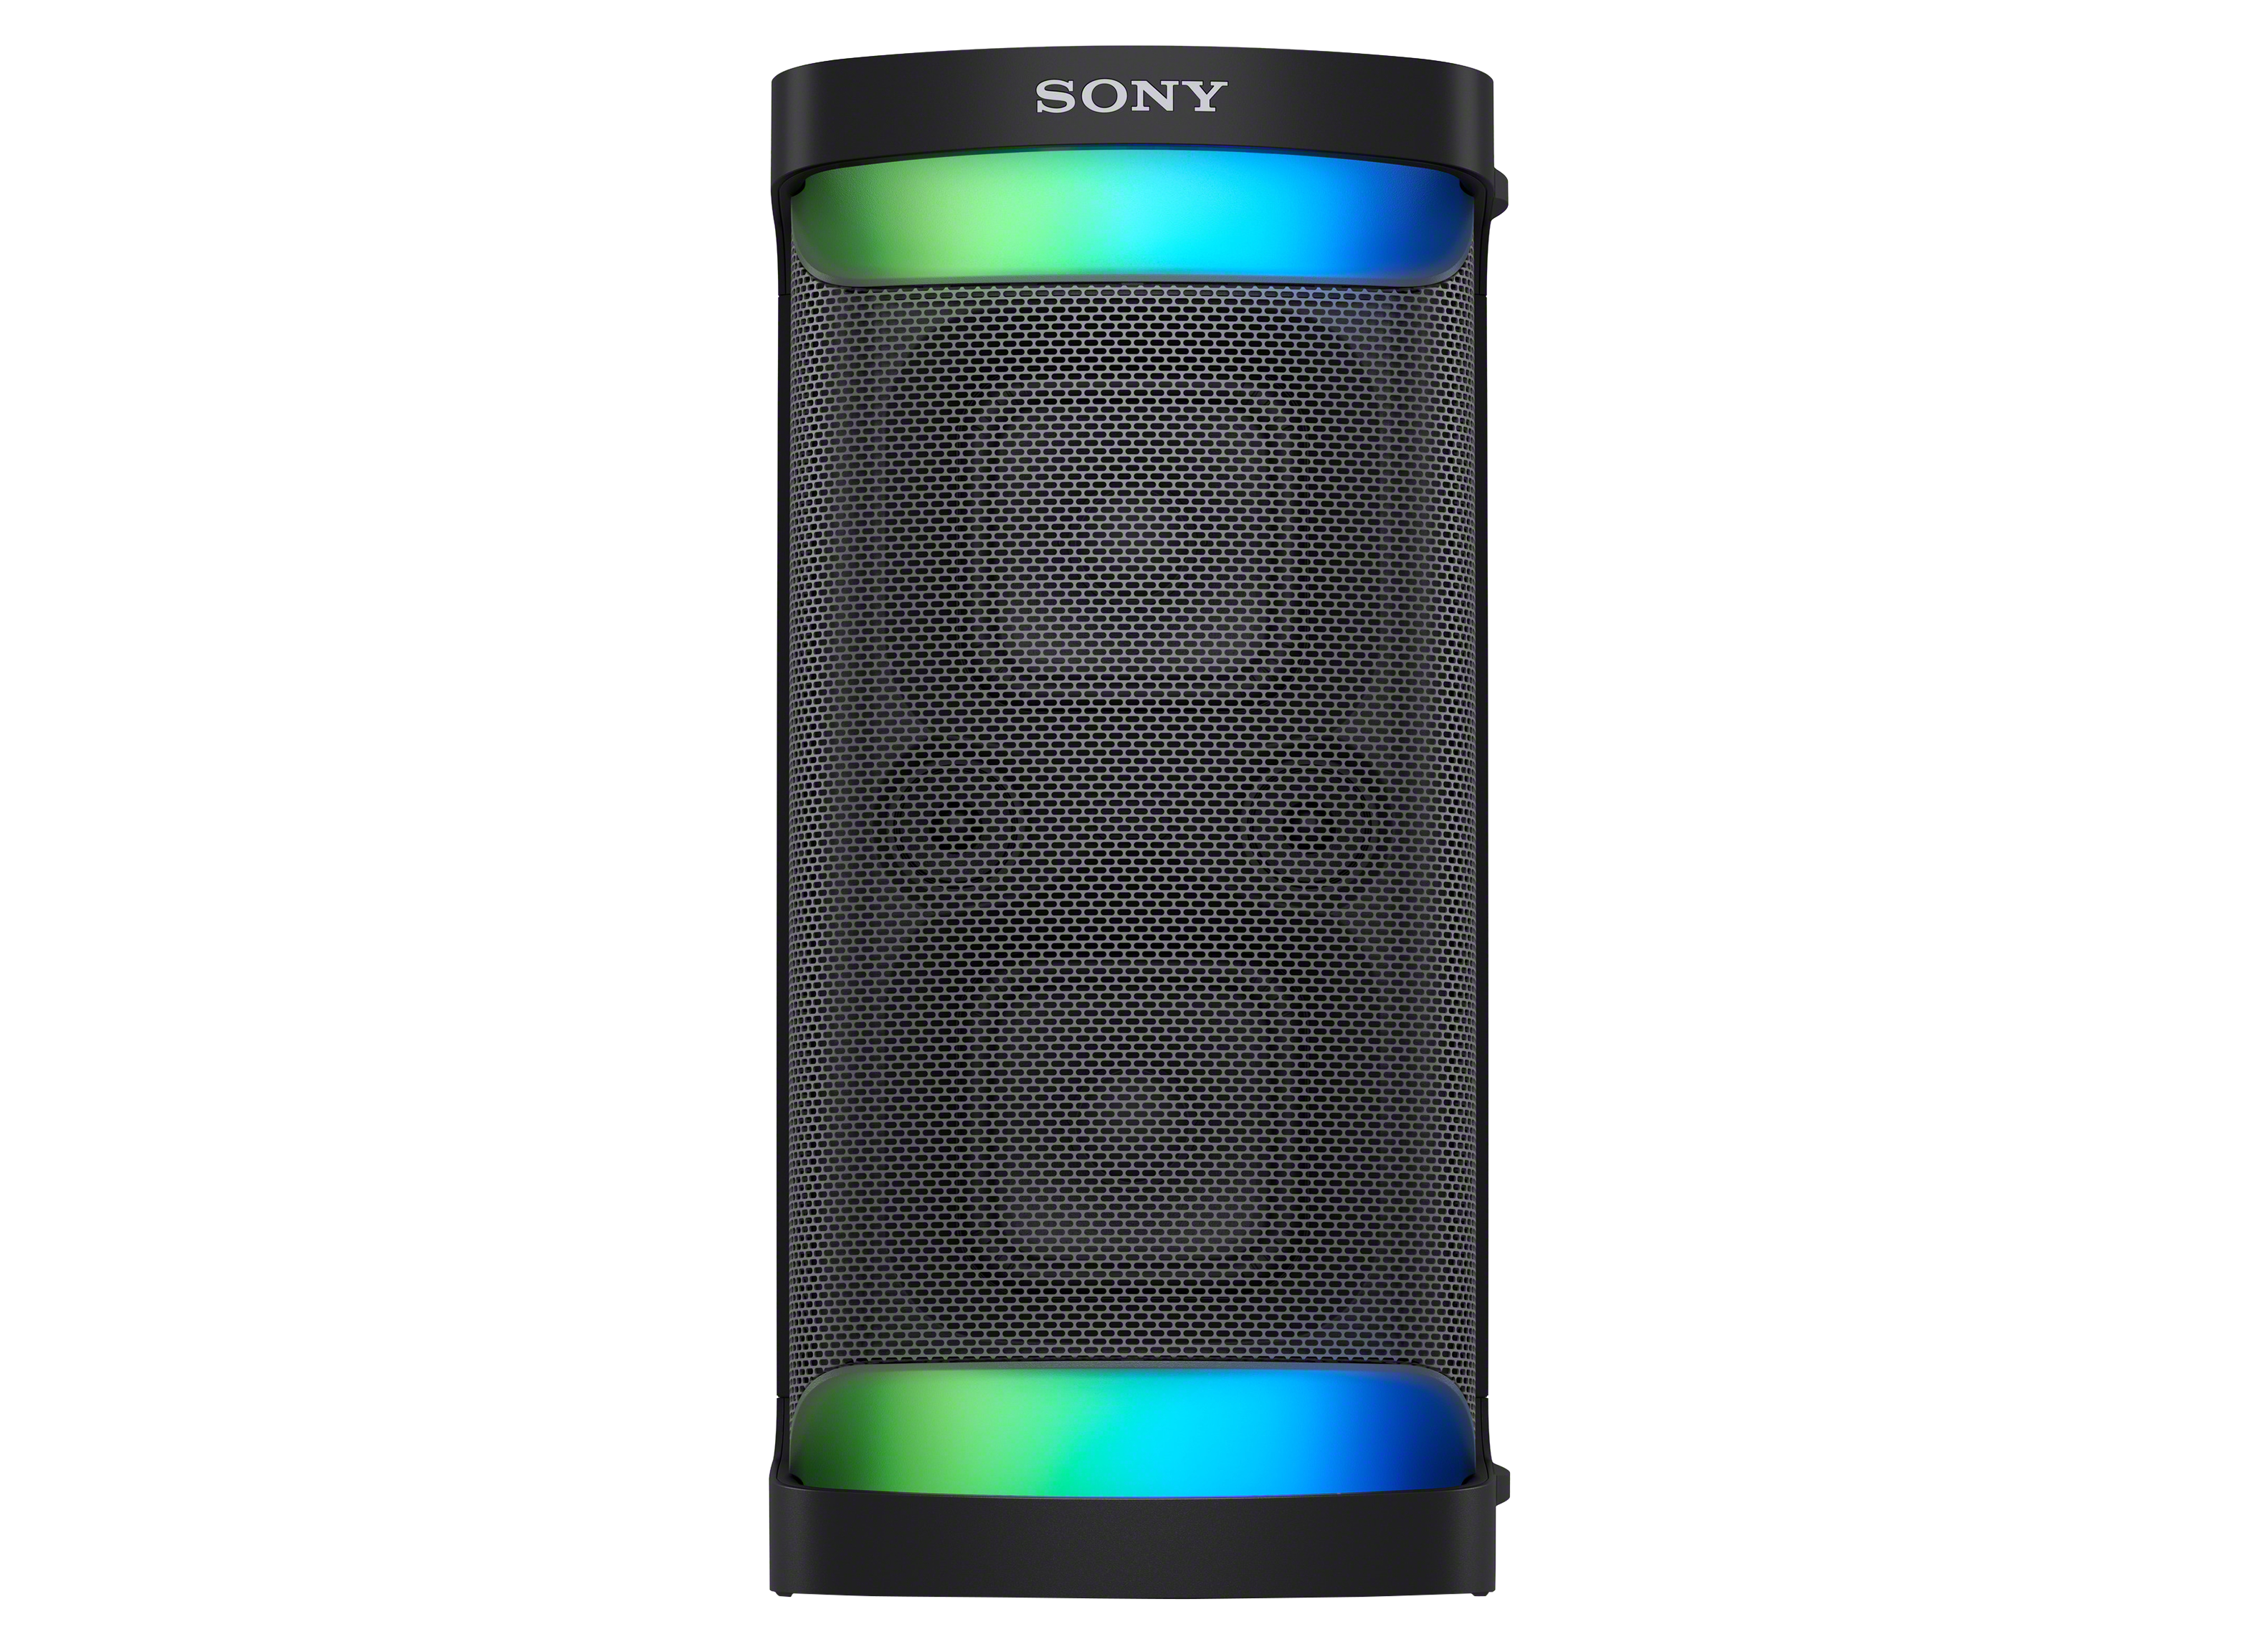 Consumer Wireless & Reports Bluetooth Sony Speaker - Review SRS-XP500